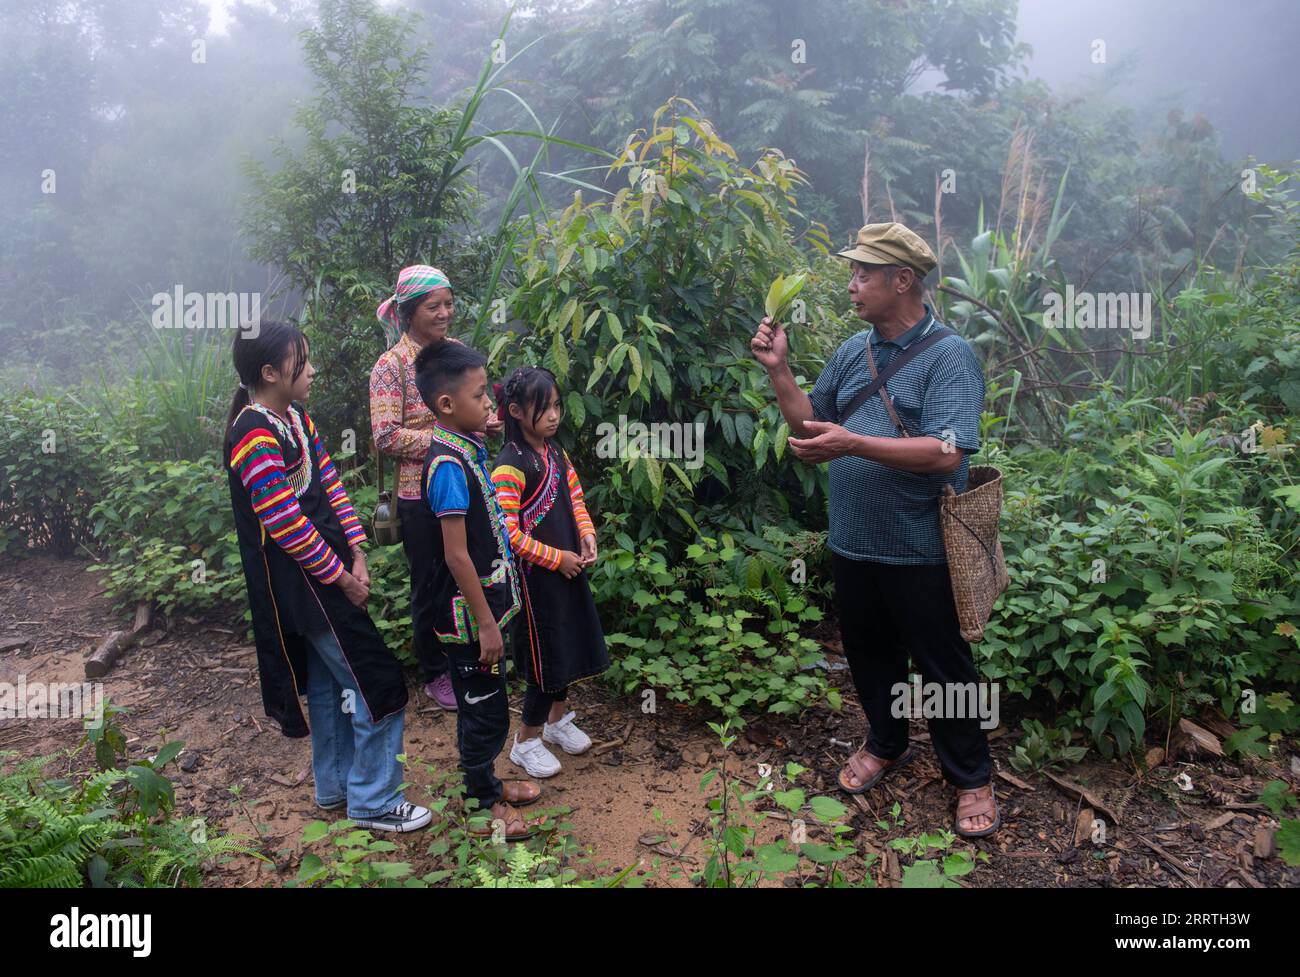 230726 -- JINPING, July 26, 2023 -- Zhang Puzhong 1st R briefs his grandchildren on herbal medicines in the forest near Xiaxinzhai Village, Zhemi Township, Jinping County, Honghe Hani and Yi Autonomous Prefecture, southwest China s Yunnan Province, July 23, 2023. After days of thinking, Zhang Puzhong decided to do something instructive to his grandchildren: bring them back to the forest he used to live as a child more than 60 years ago. This is very important. I know how happy I am today because I never forget how bitter my life was in the past, Zhang said. Zhang is a 70-year-old Kucong reside Stock Photo